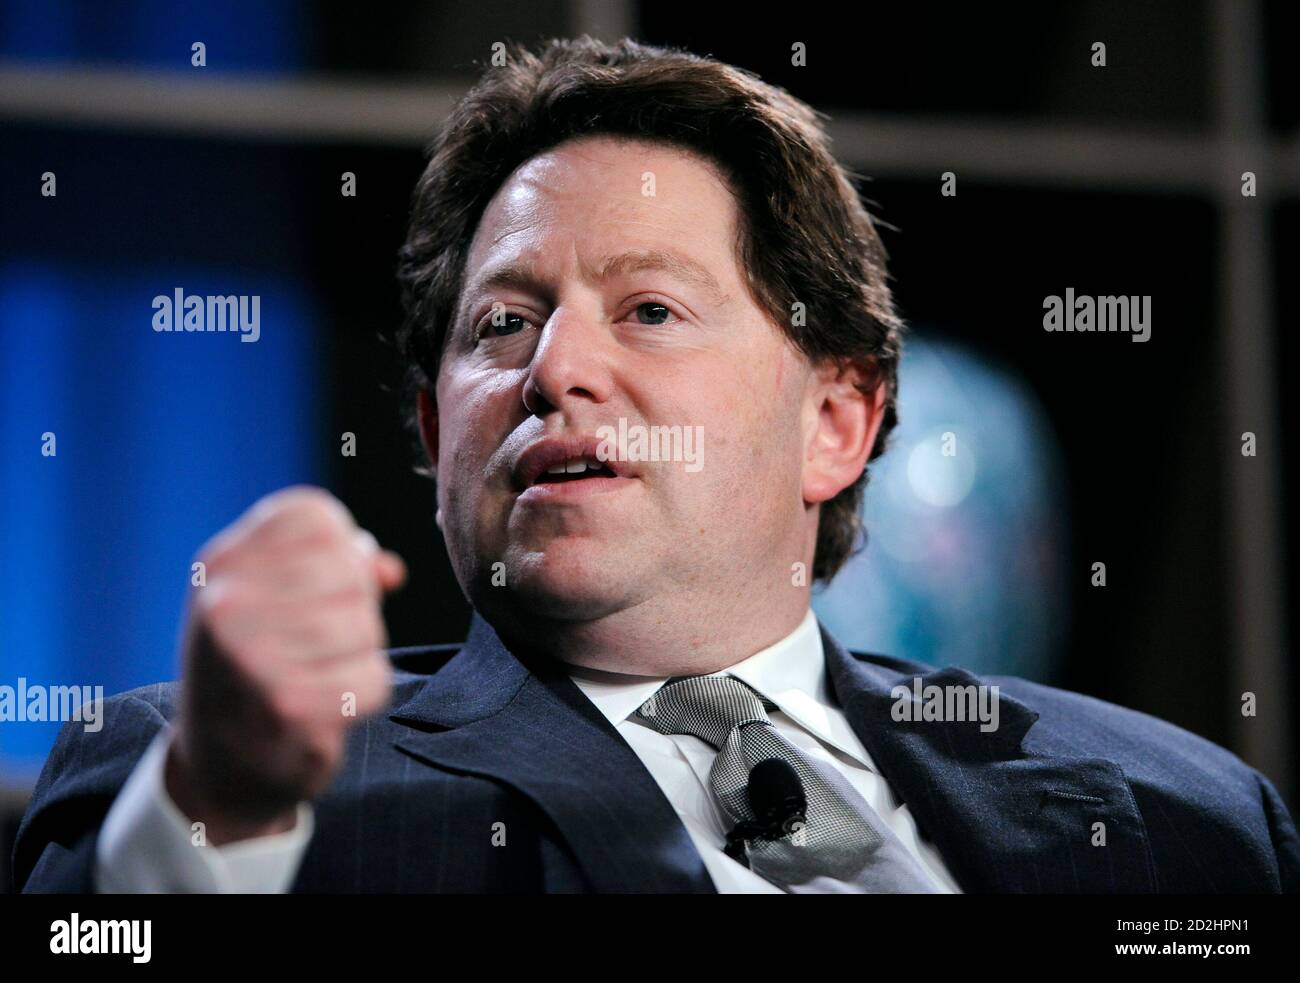 Robert Kotick, President and CEO of Activision Blizzard, participates in  the "The Business Behind the Show: Outlook for the Entertainment Industry"  panel at the 2010 Milken Institute Global Conference in Beverly Hills,